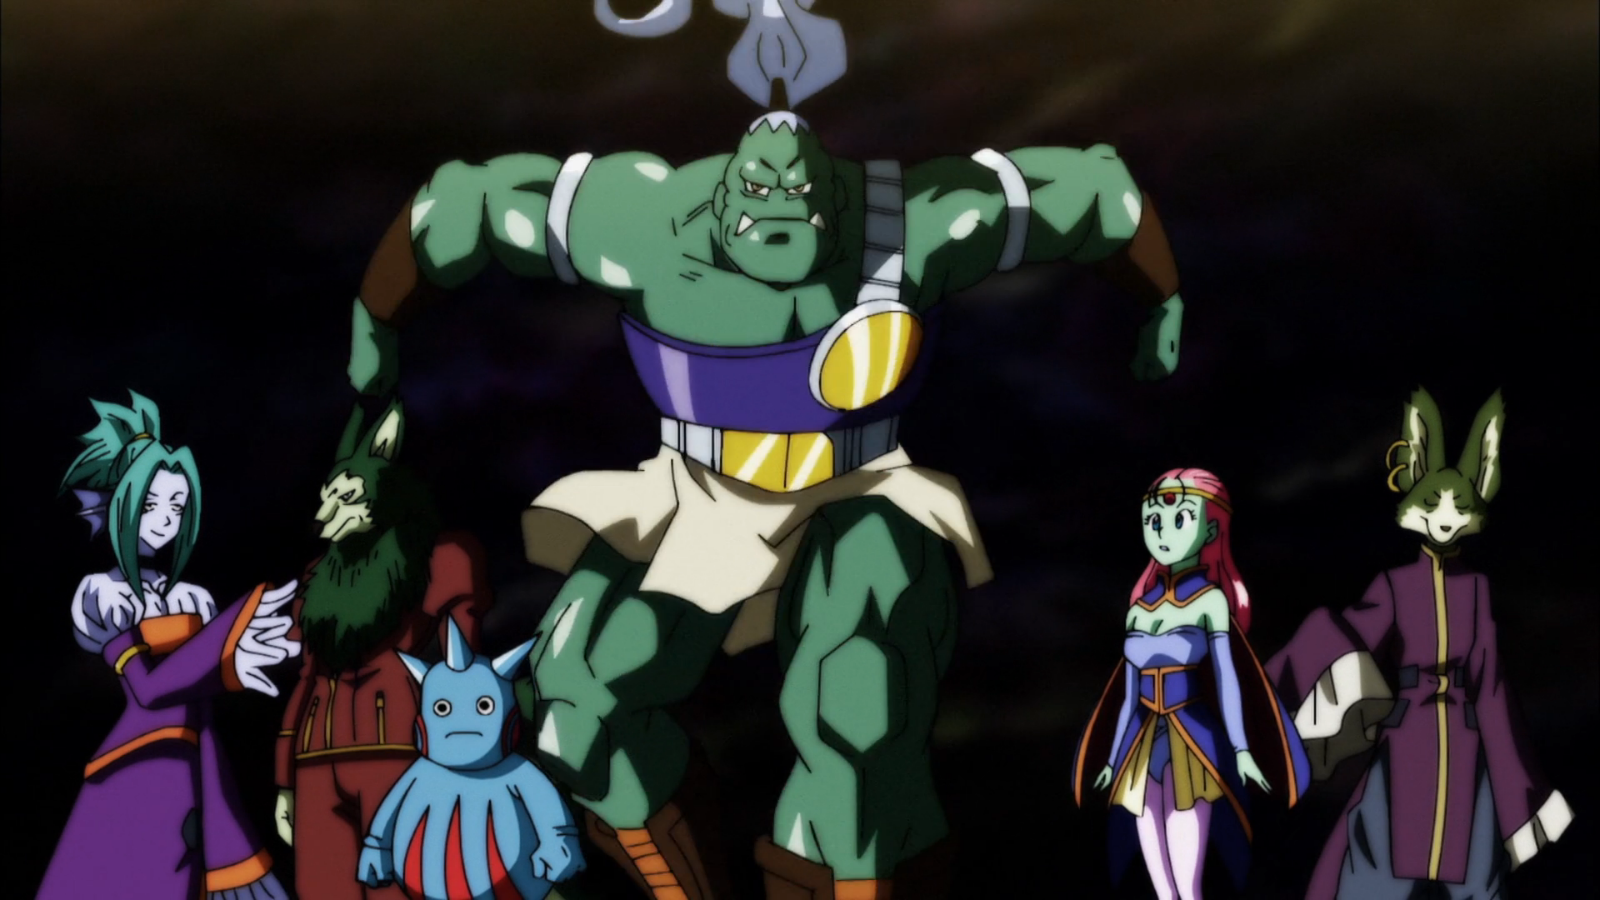 Image - Universe 4 Team PT 1 (Dragon Ball Super Ep 96).png | AnimeVice Wiki | FANDOM powered by ...